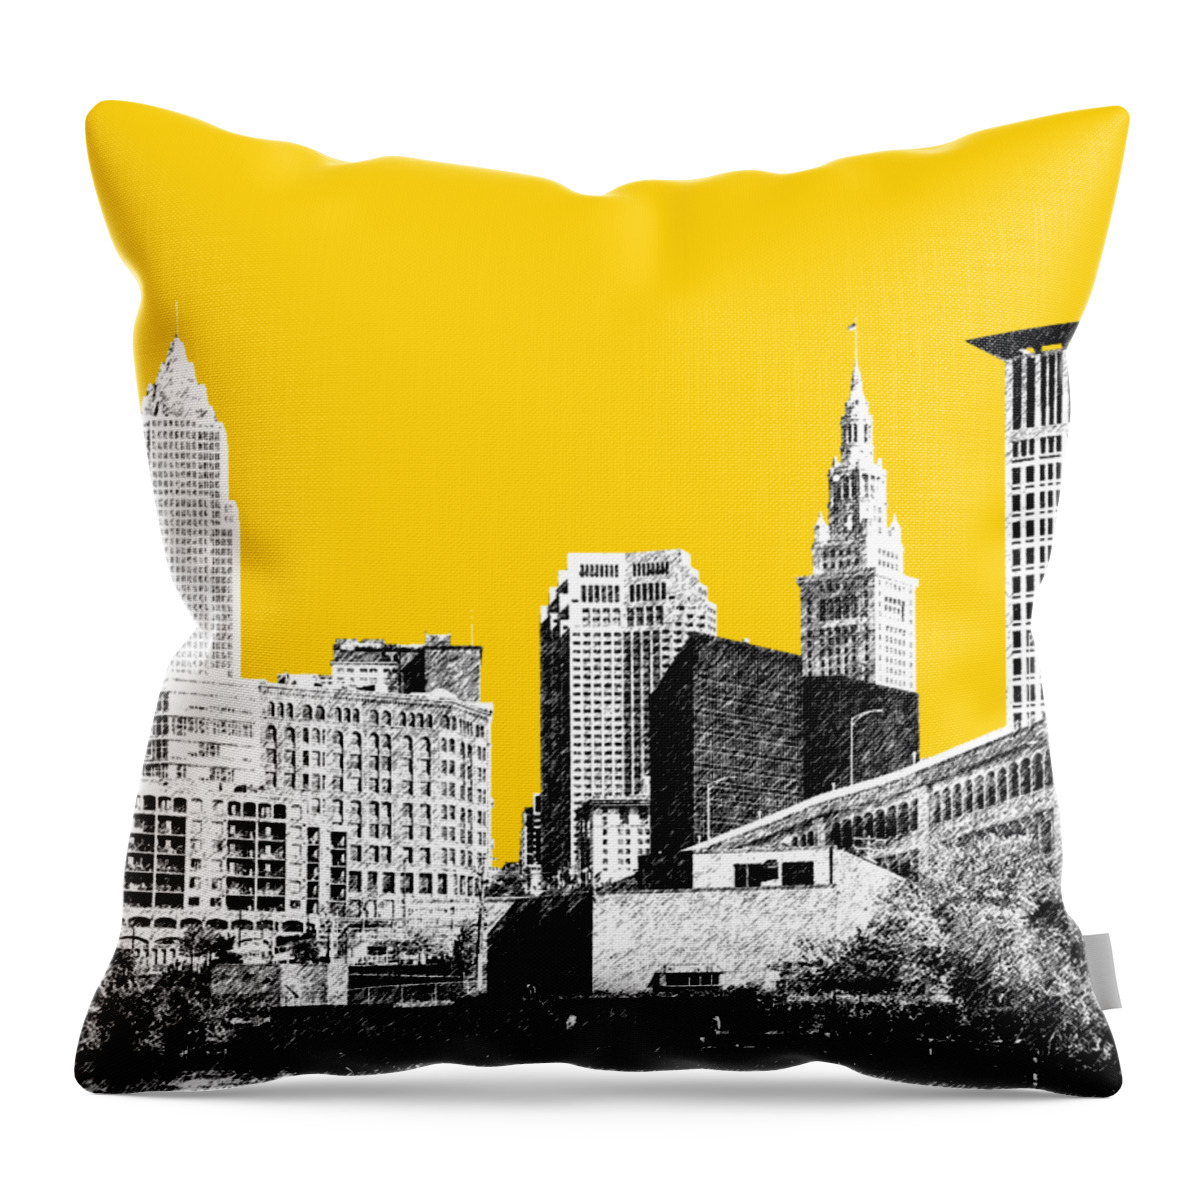 Architecture Throw Pillow featuring the digital art Cleveland Skyline 3 - Mustard by DB Artist